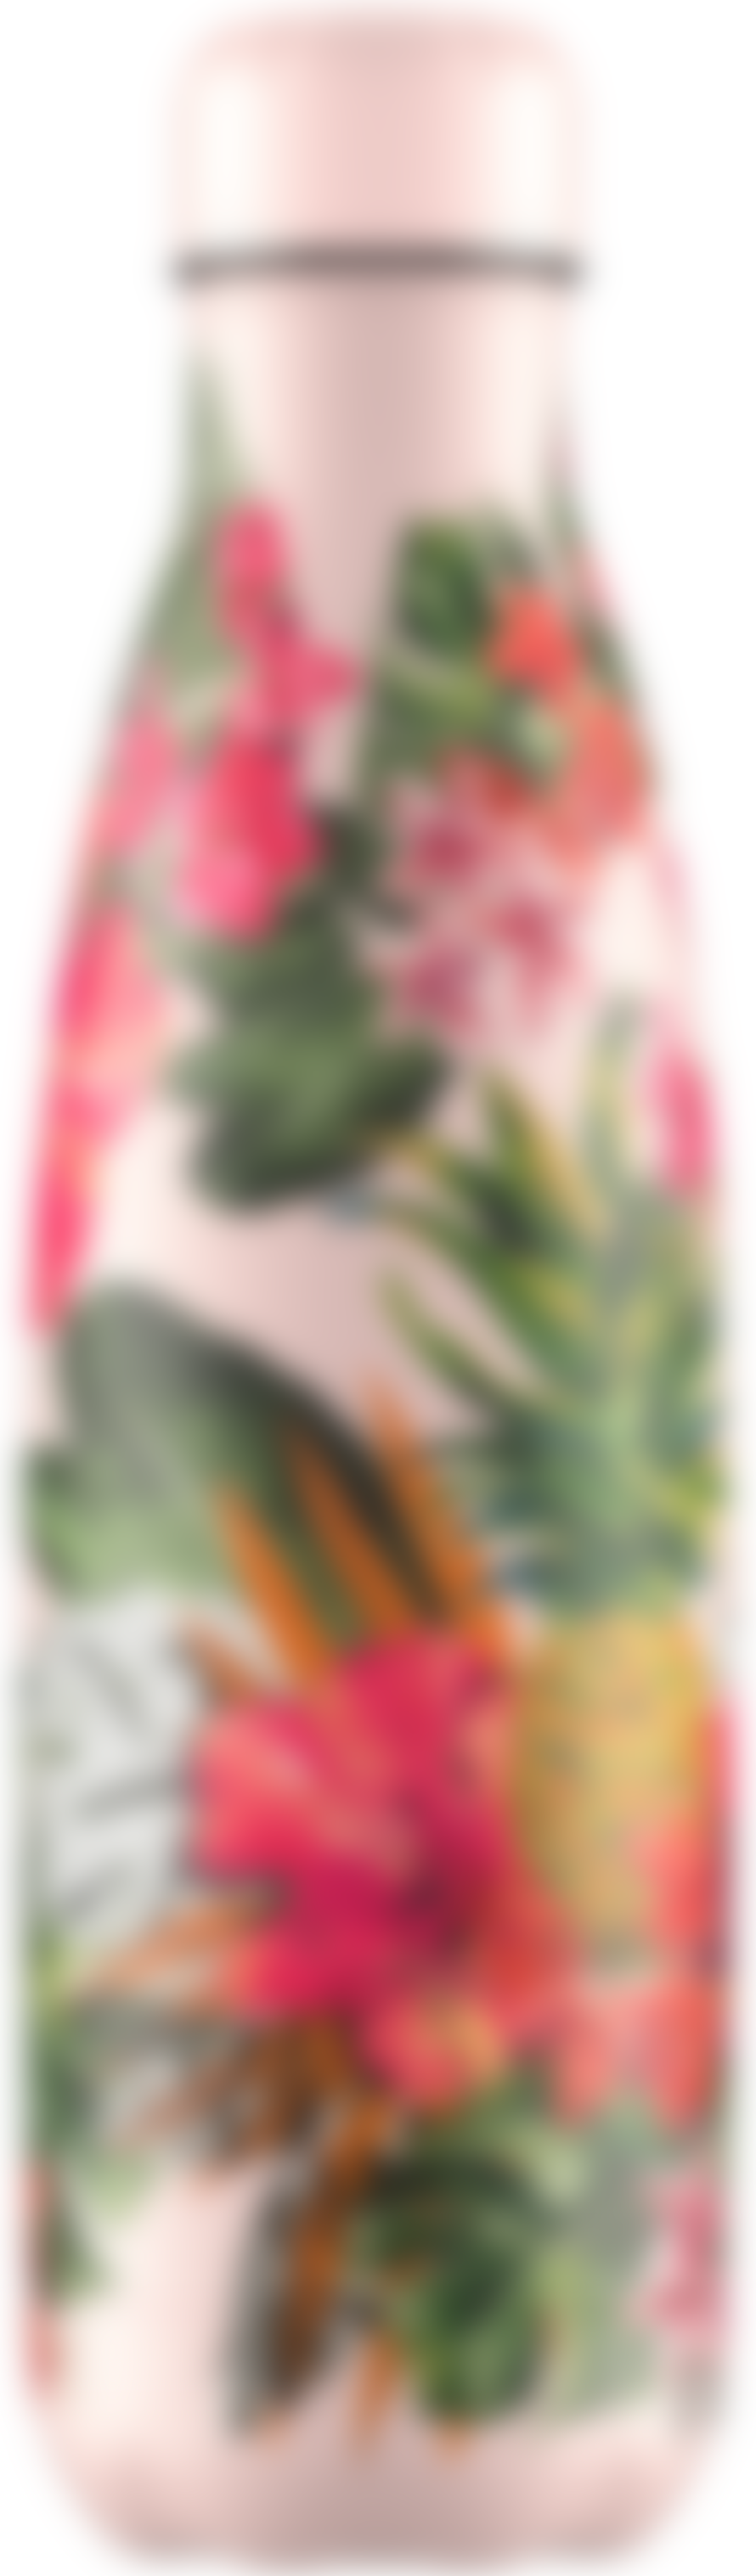 Chilly's Bottle Tropical Edition 500ml - Hidden Toucan